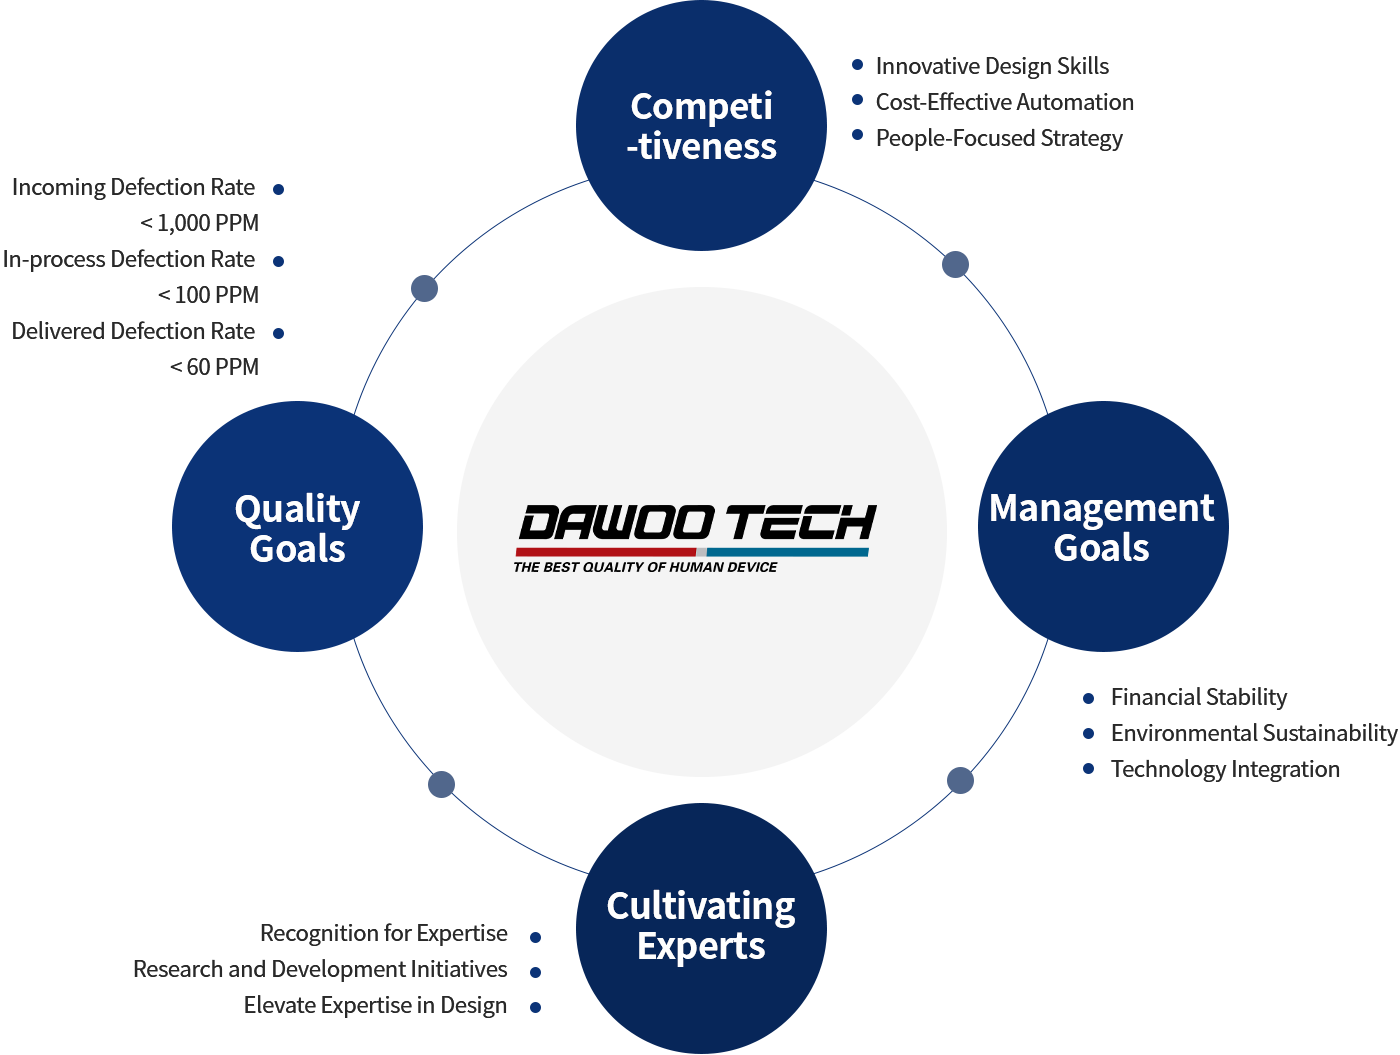  dawoo-technology’s-four-management-policies-securing-management-=